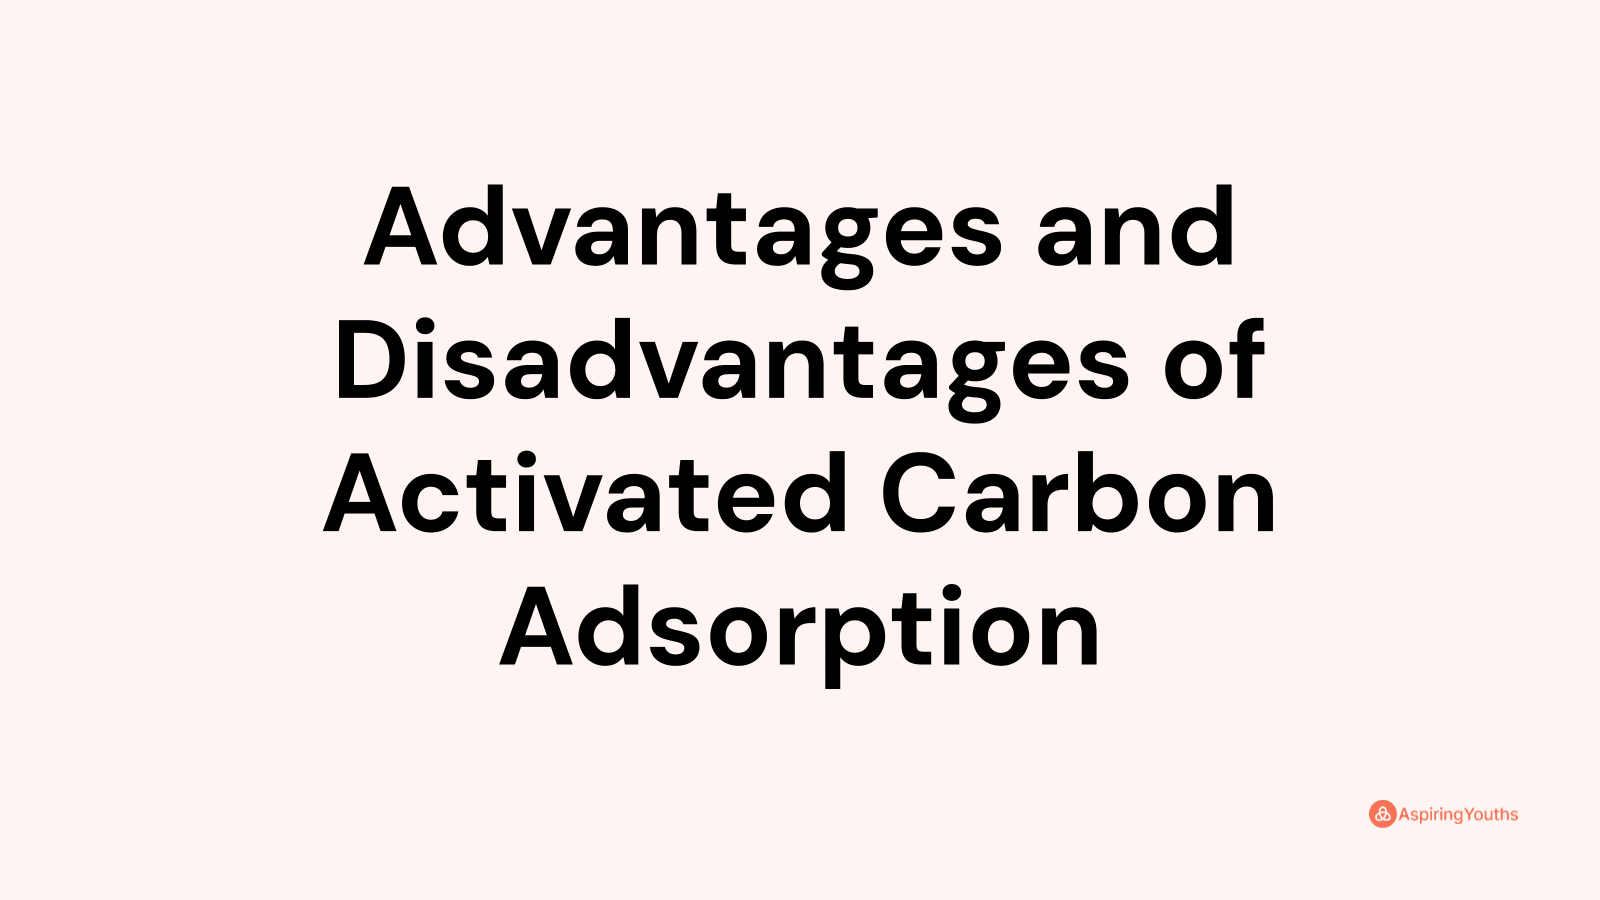 Advantages and disadvantages of Activated Carbon Adsorption